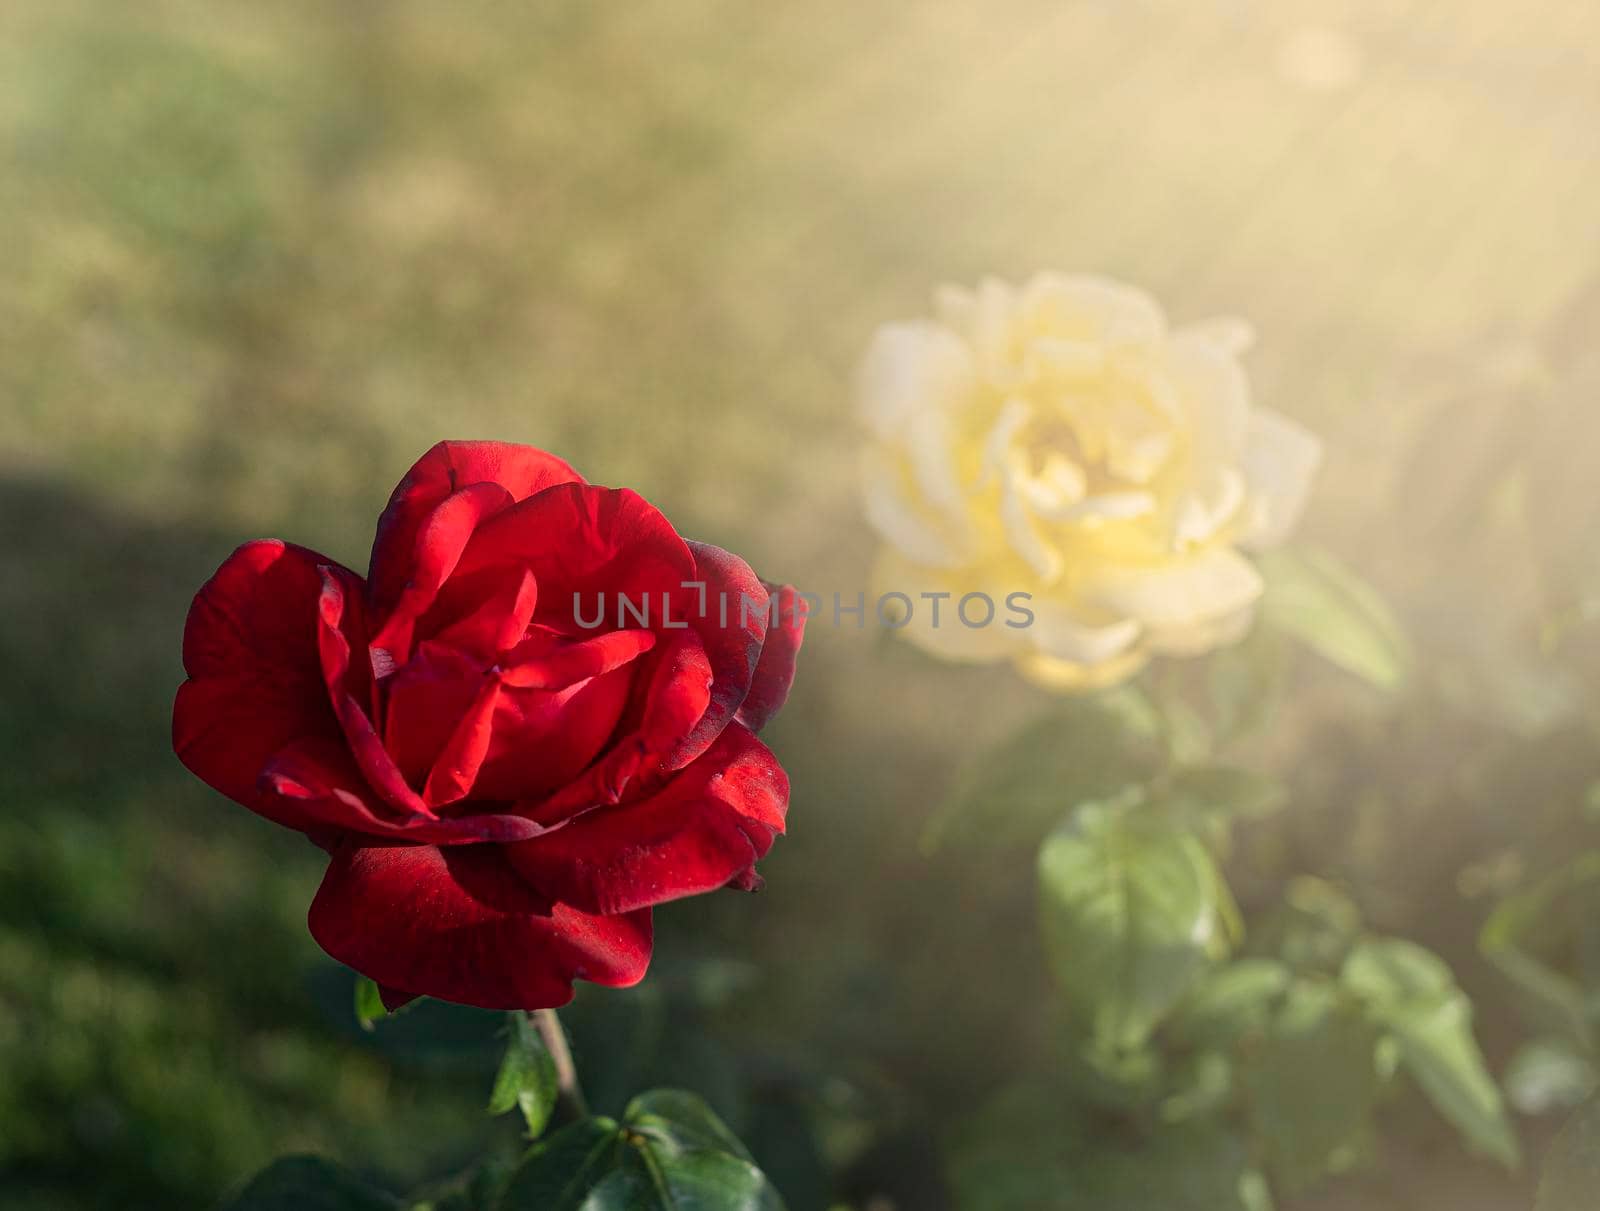 Red Roses in the garden in the rays of the sun